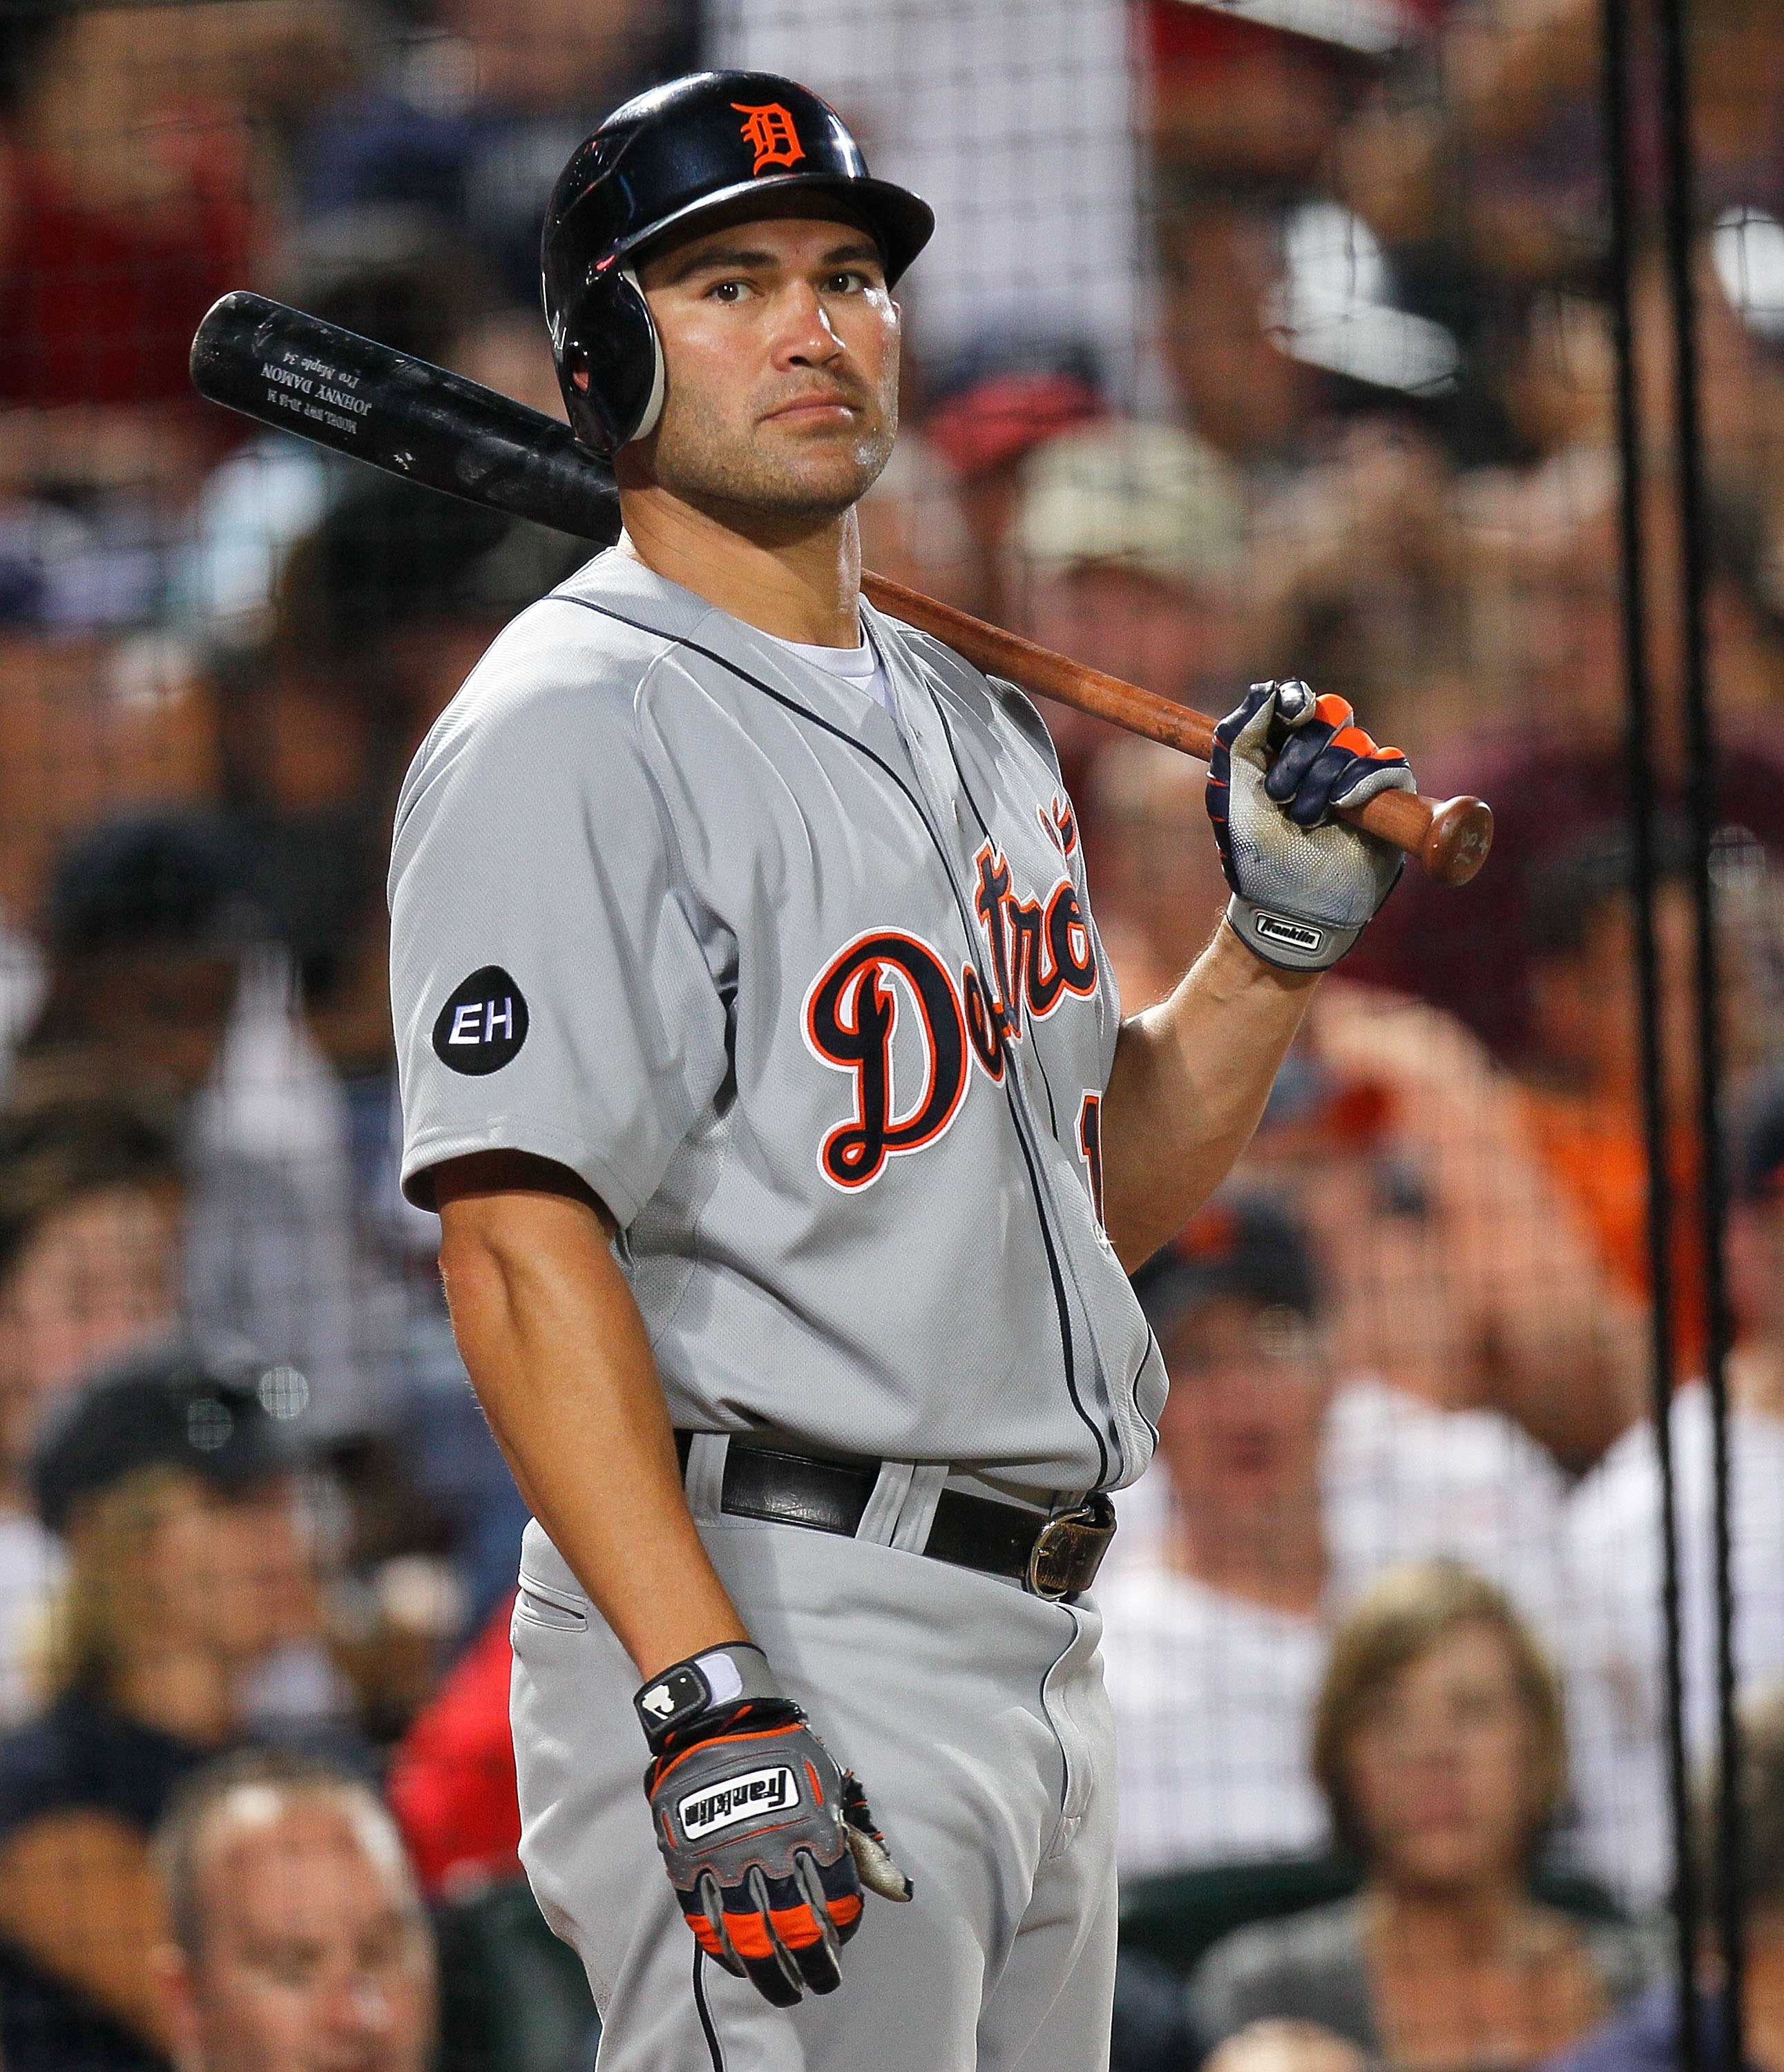 ATLANTA - JUNE 25:  Johnny Damon #18 of the Detroit Tigers against the Atlanta Braves at Turner Field on June 25, 2010 in Atlanta, Georgia.  (Photo by Kevin C. Cox/Getty Images)